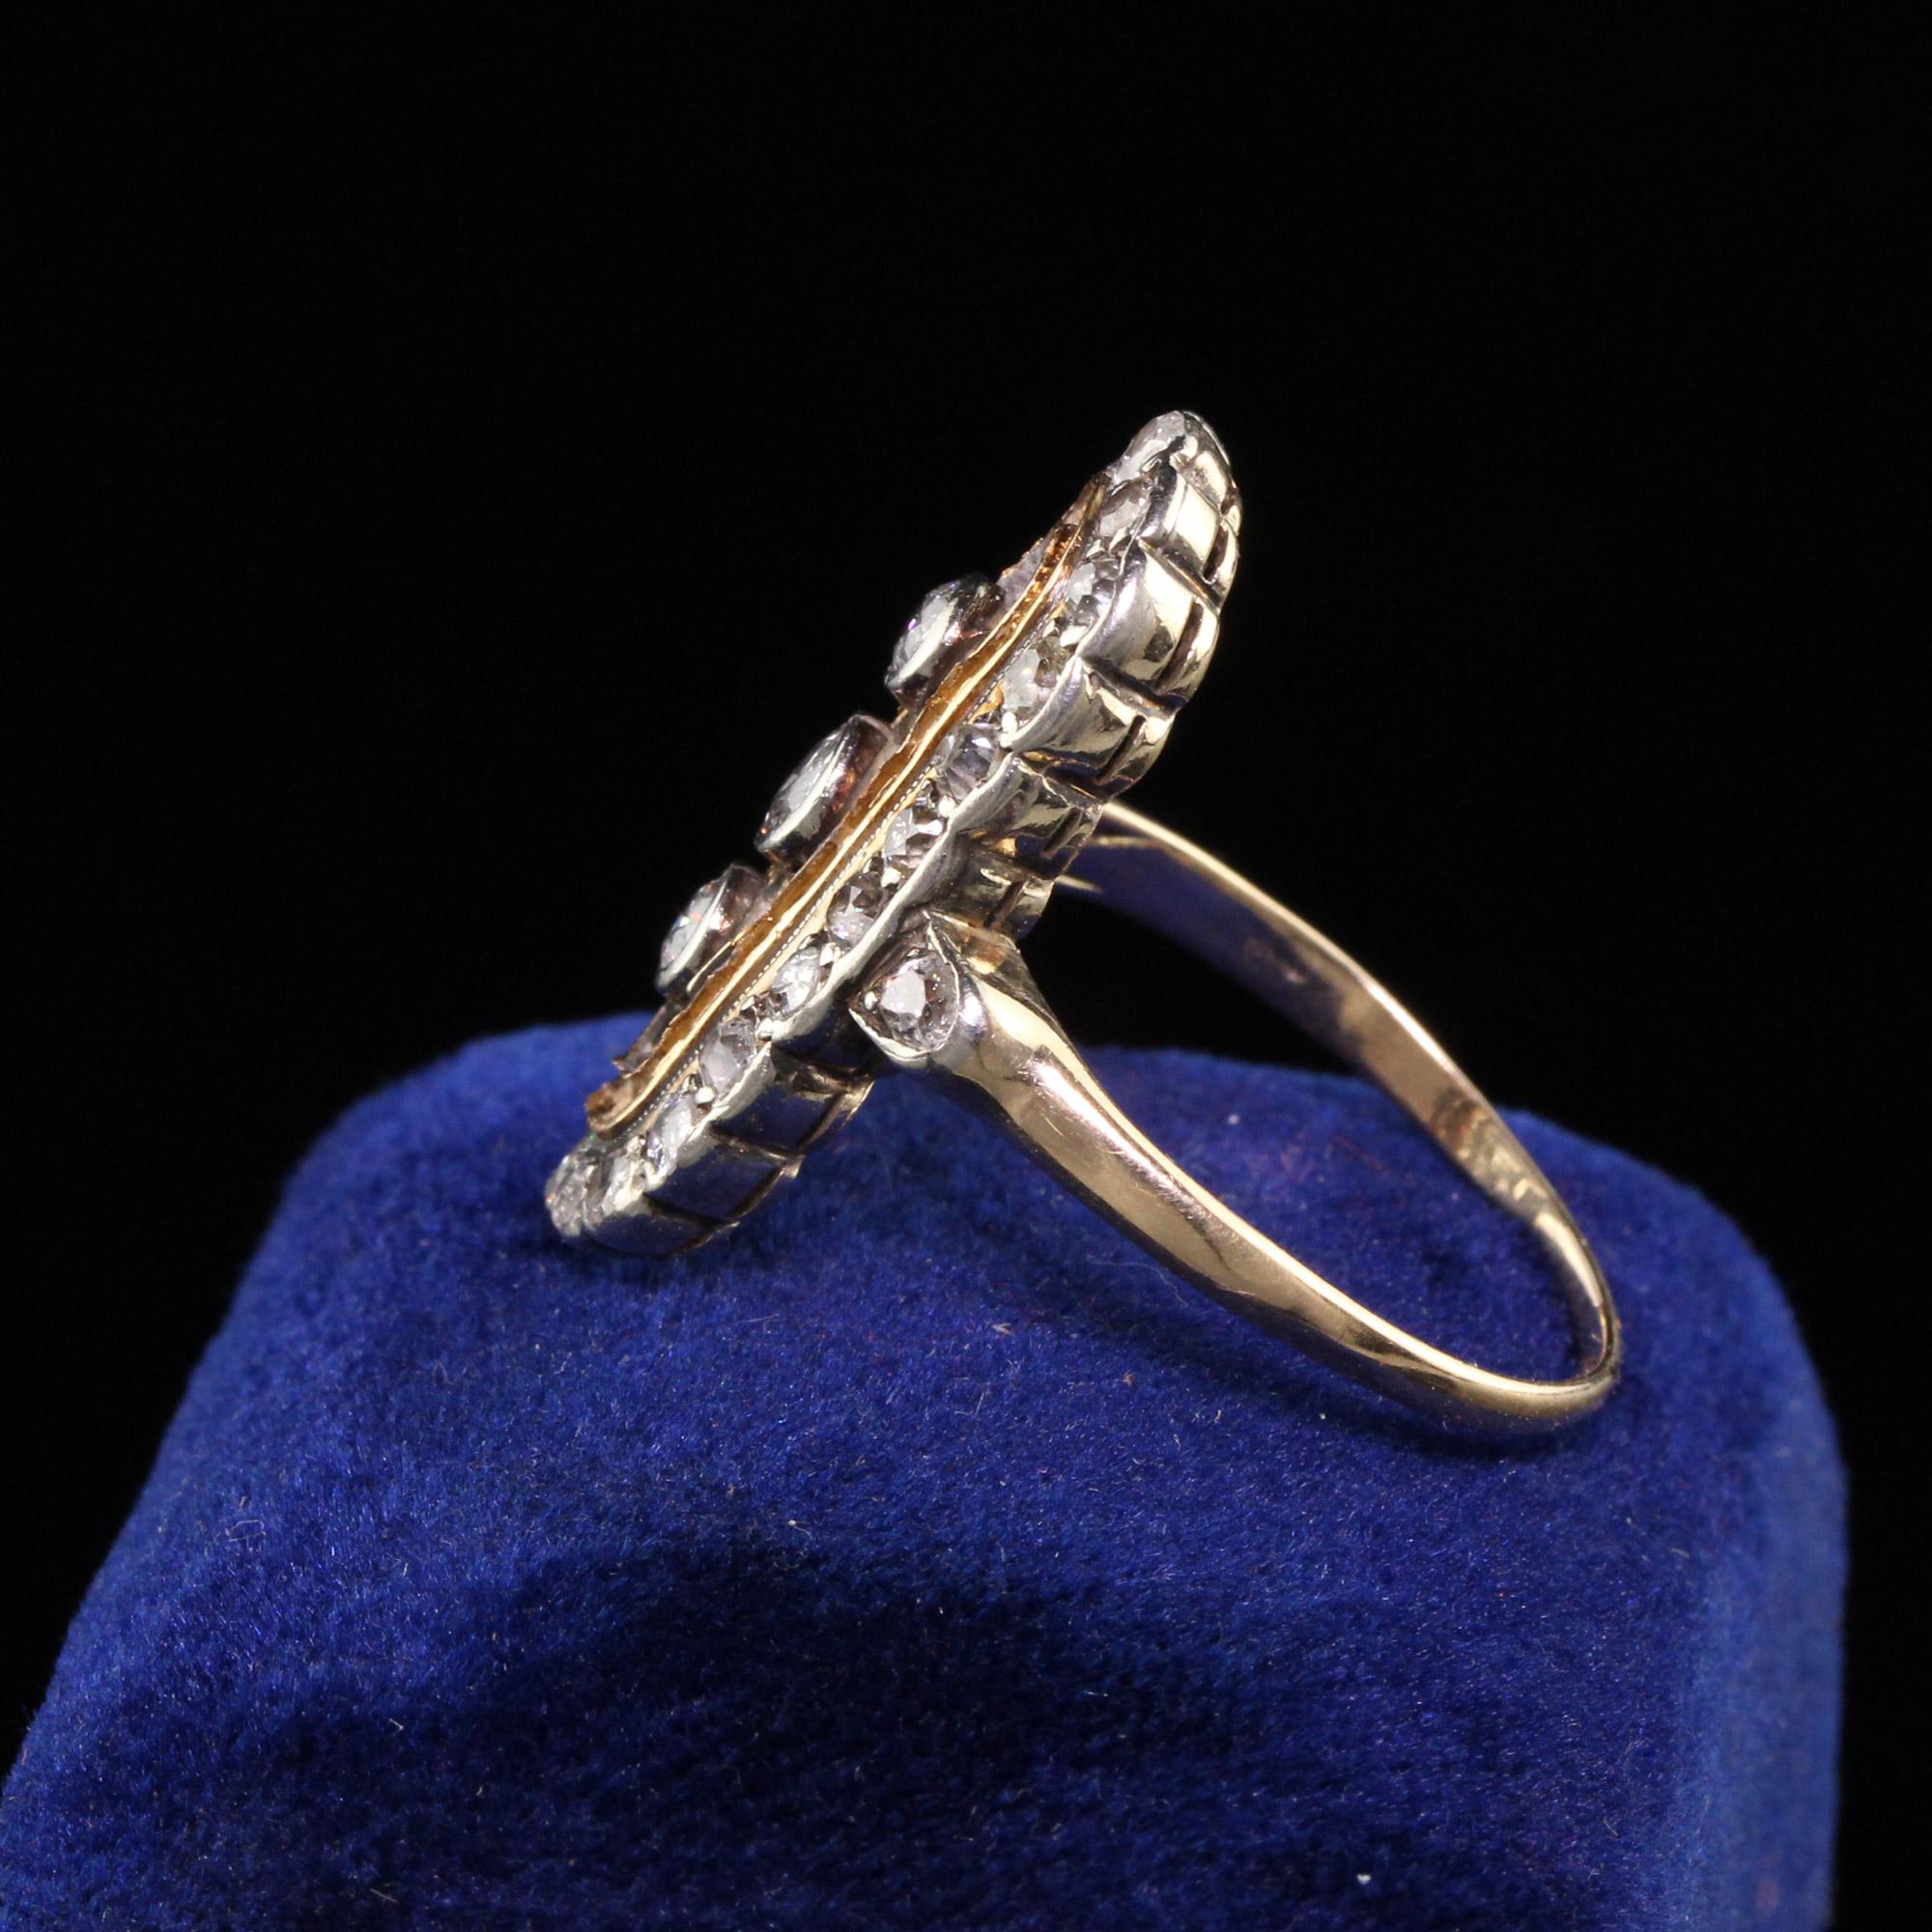 Beautiful Antique Art Deco 14K Yellow Gold Old Mine Diamond Shield Ring. This beautiful art deco ring has chunky old mine cut diamonds set in a yellow gold filigree ring.

Item #R0804

Metal: 14K Yellow Gold and Silver Top

Diamond: Approximately